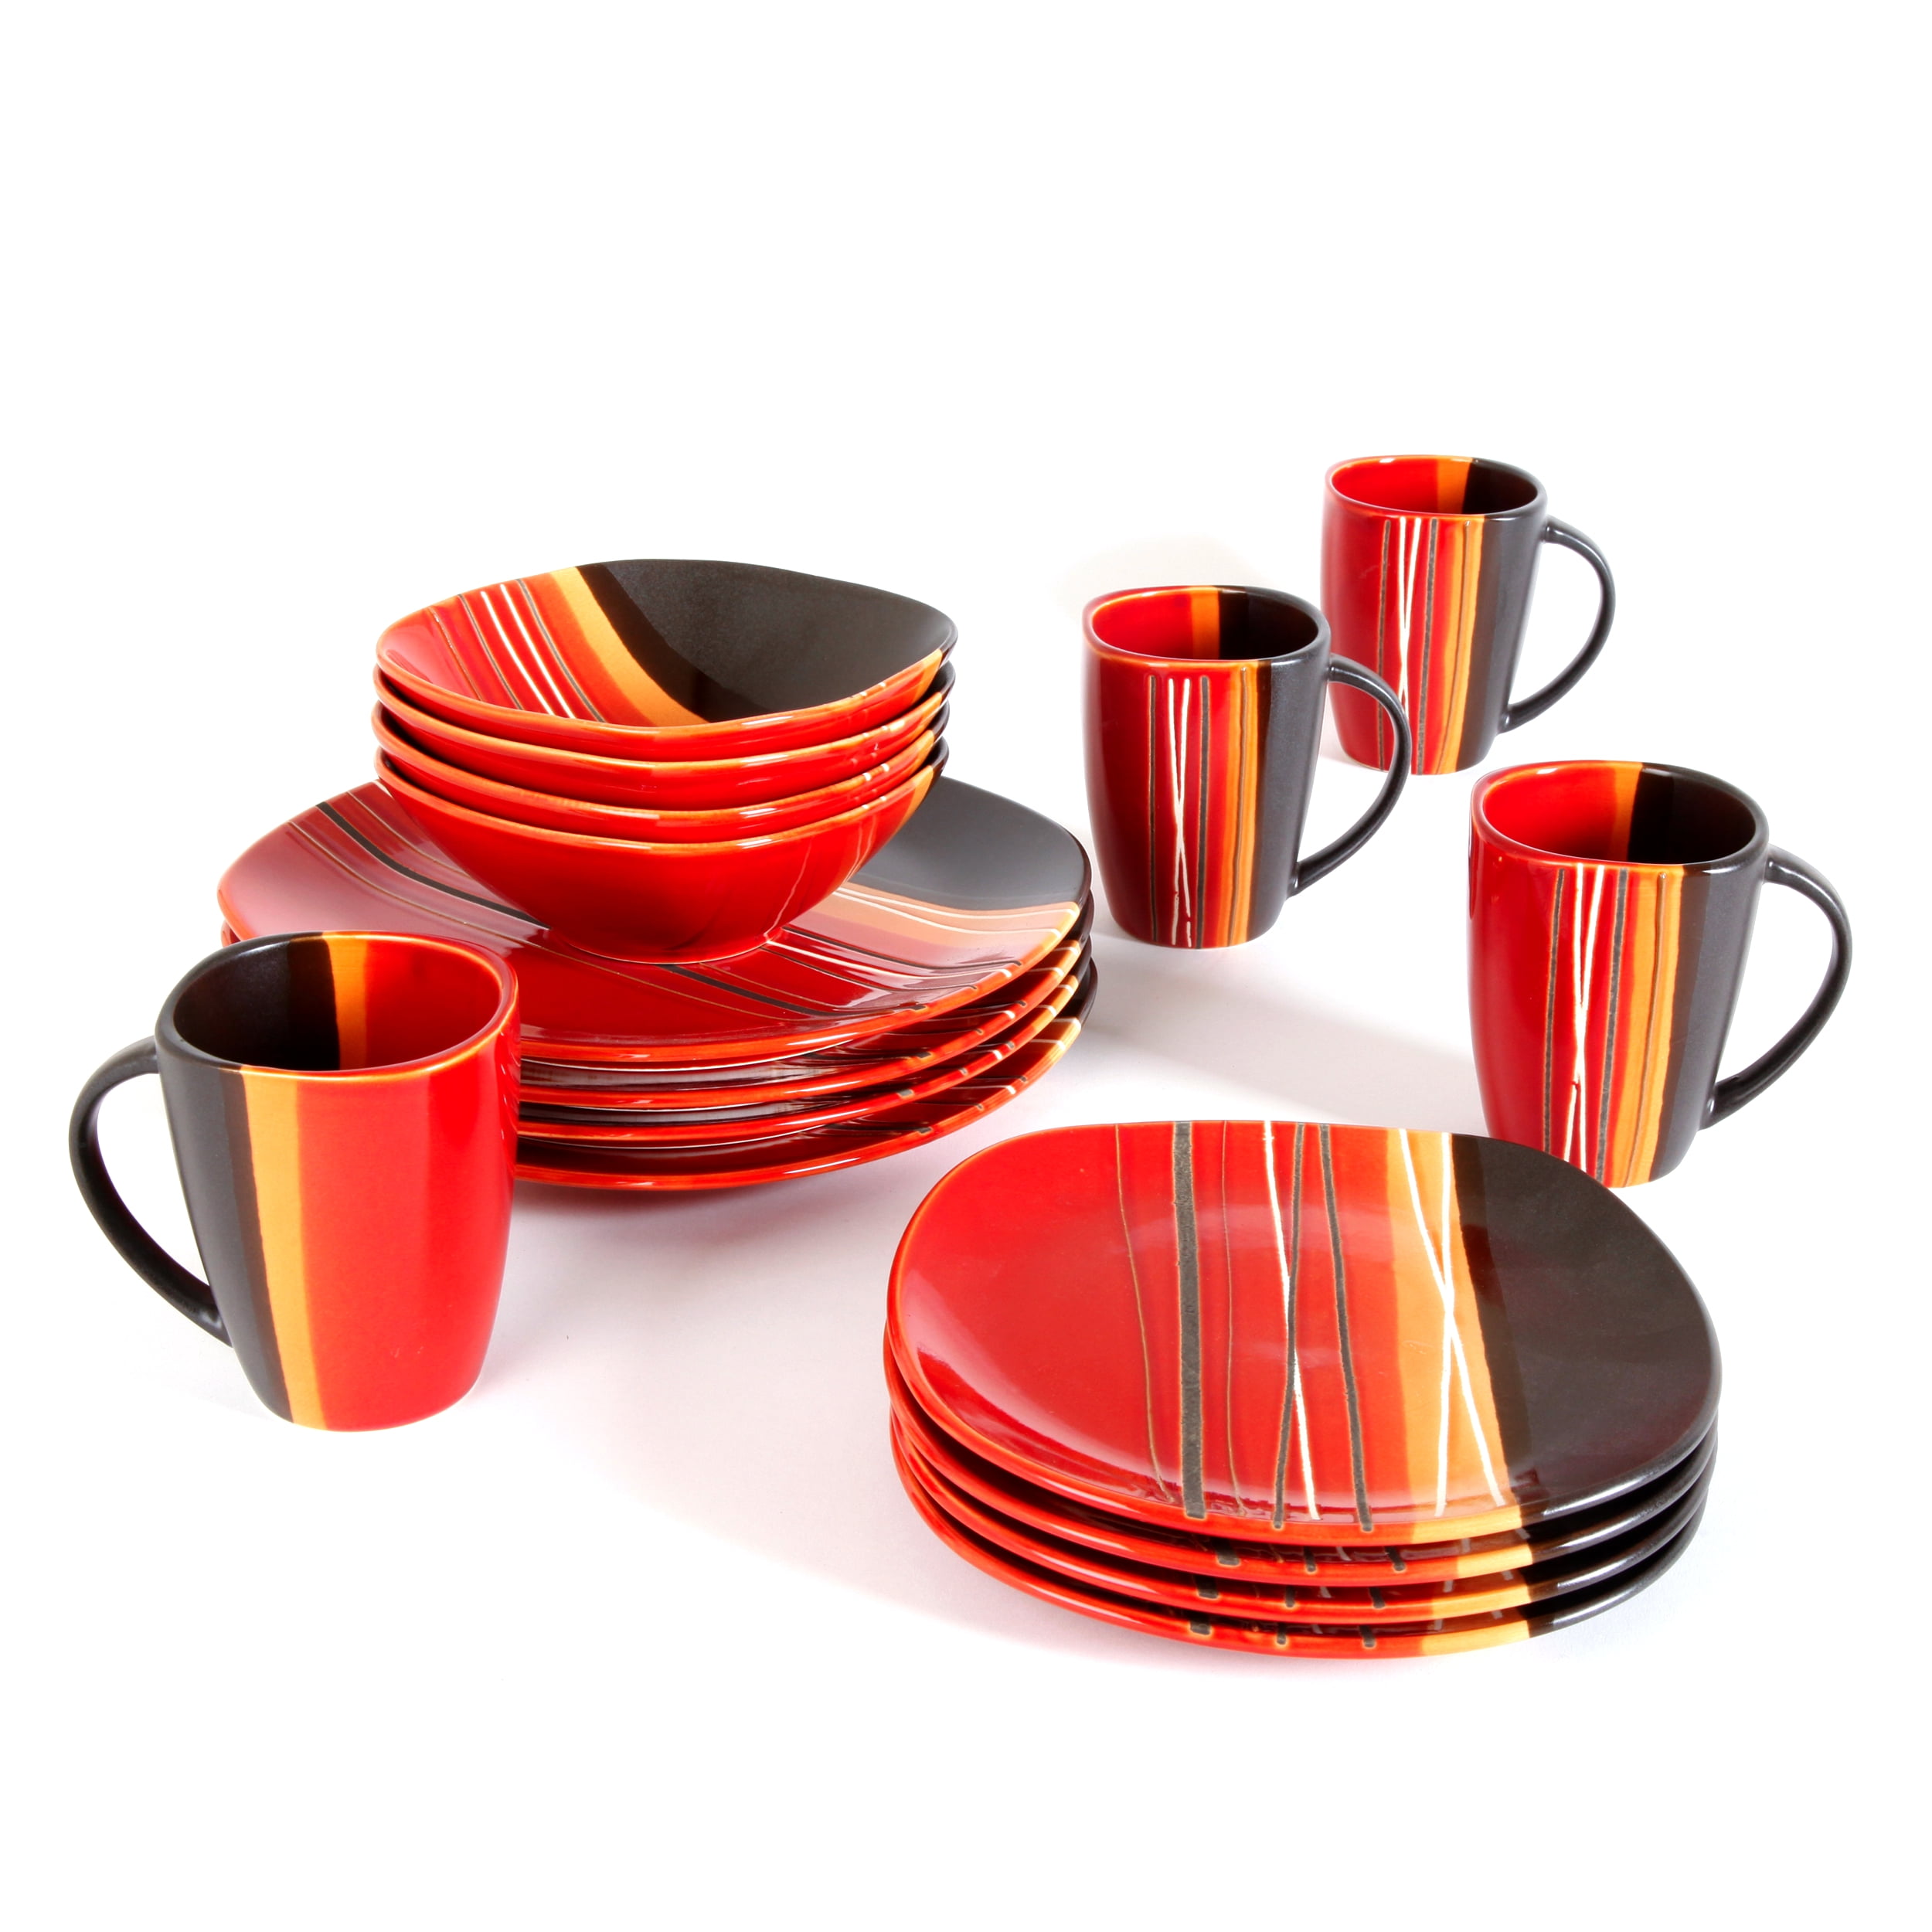 Red Dinnerware Set 16 Piece Square Plates Bowls 4 Place Settings Dinner Dishes 